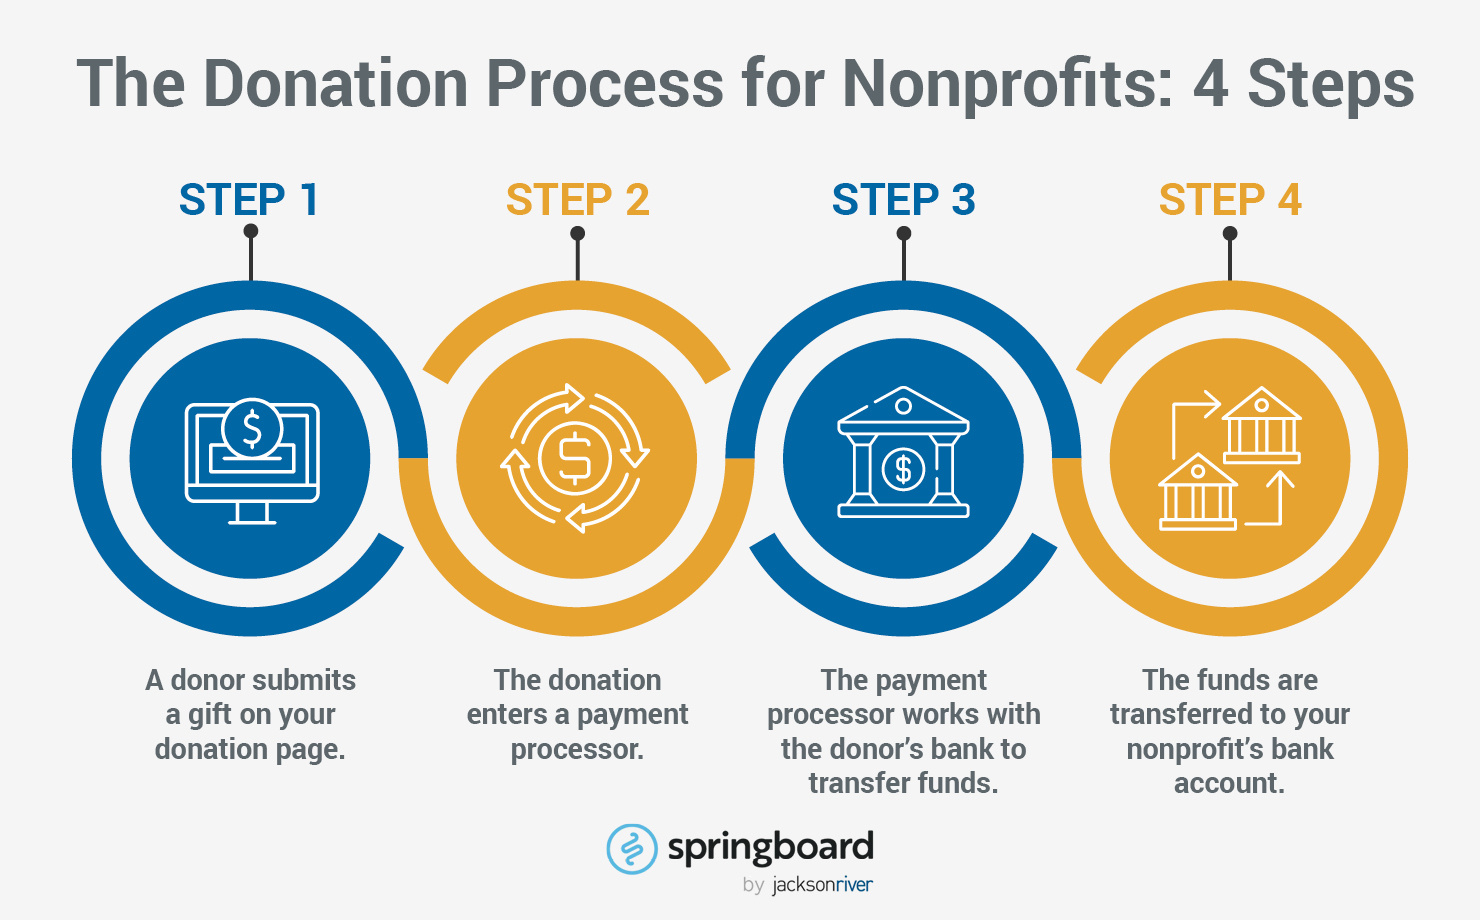 What the general donation process looks like, as described in more detail below.